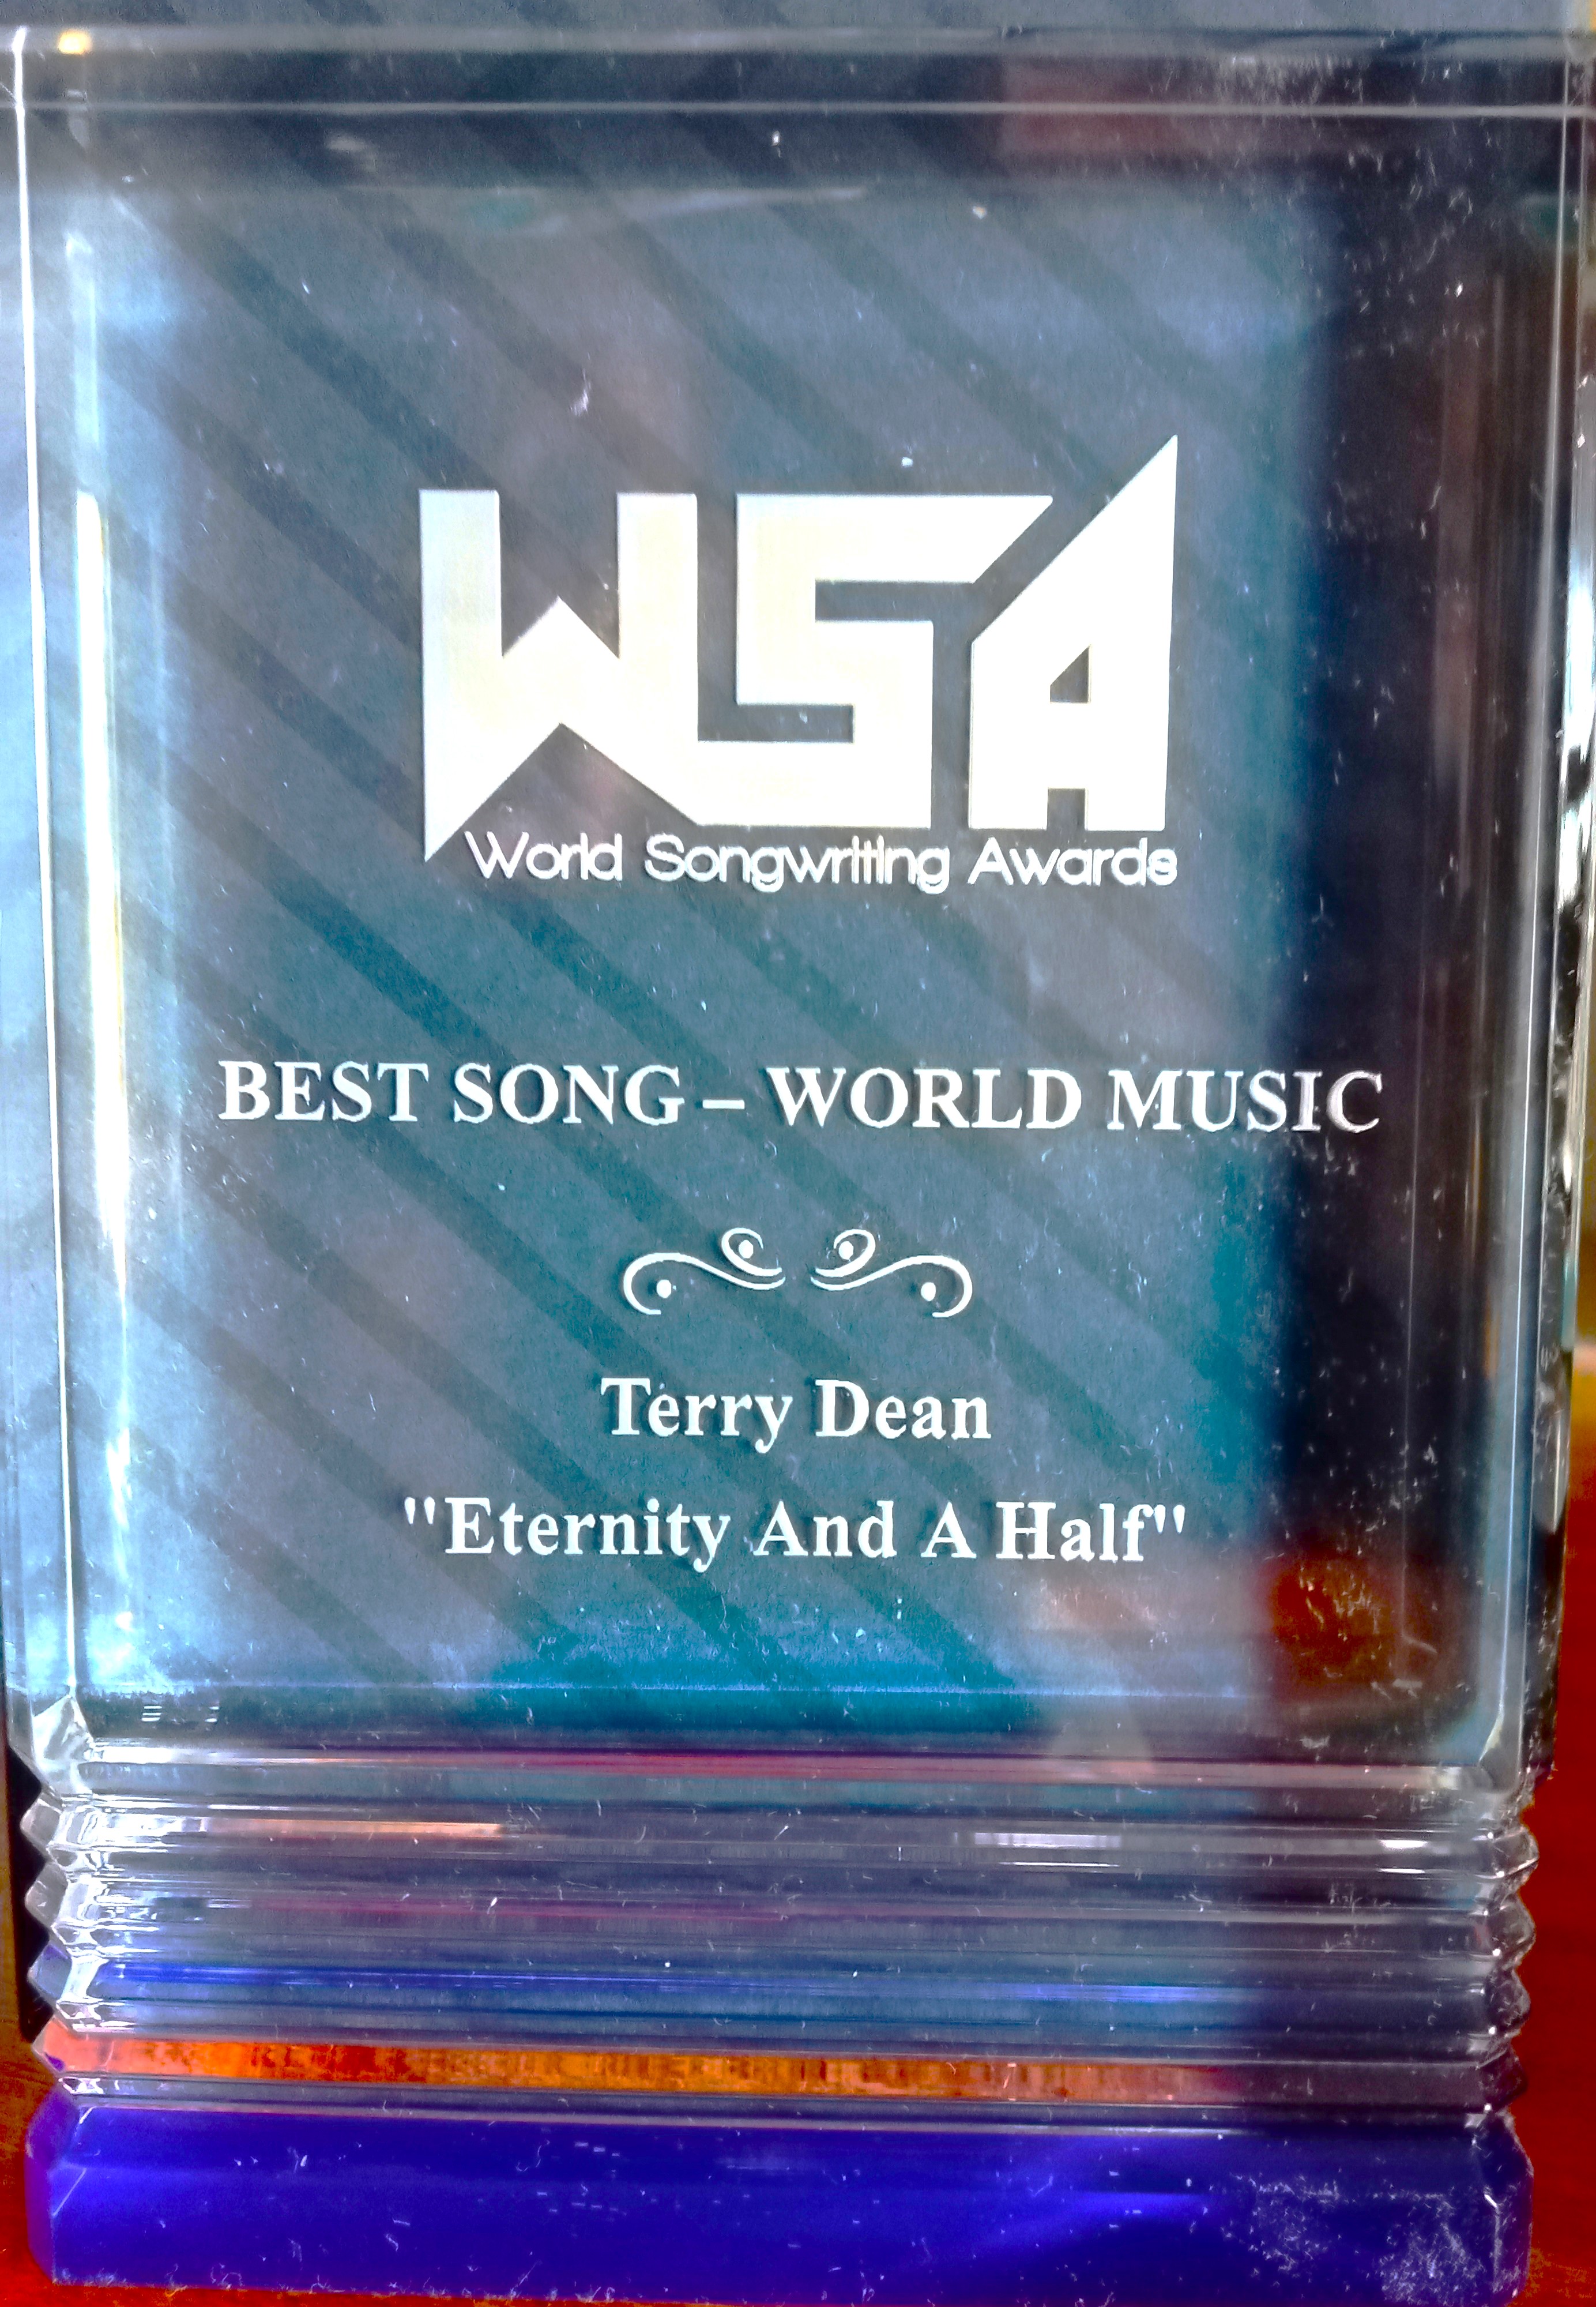 WSA  Best song in the 'World Category
Award for 'Eternity and a Half'